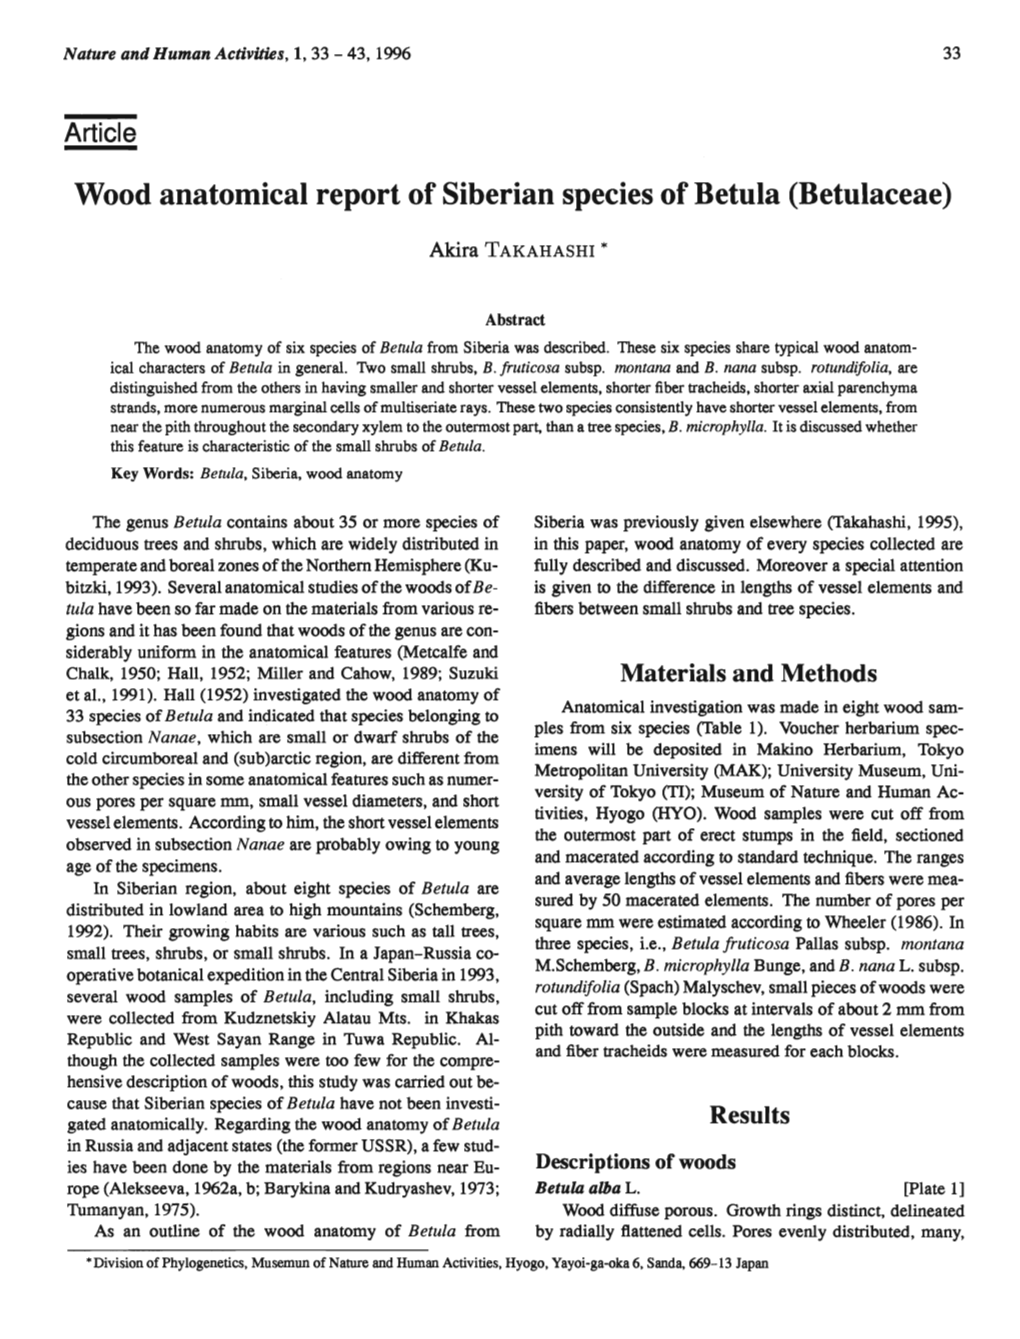 Wood Anatomical Report of Siberian Specied of Betula (Betulaceae)